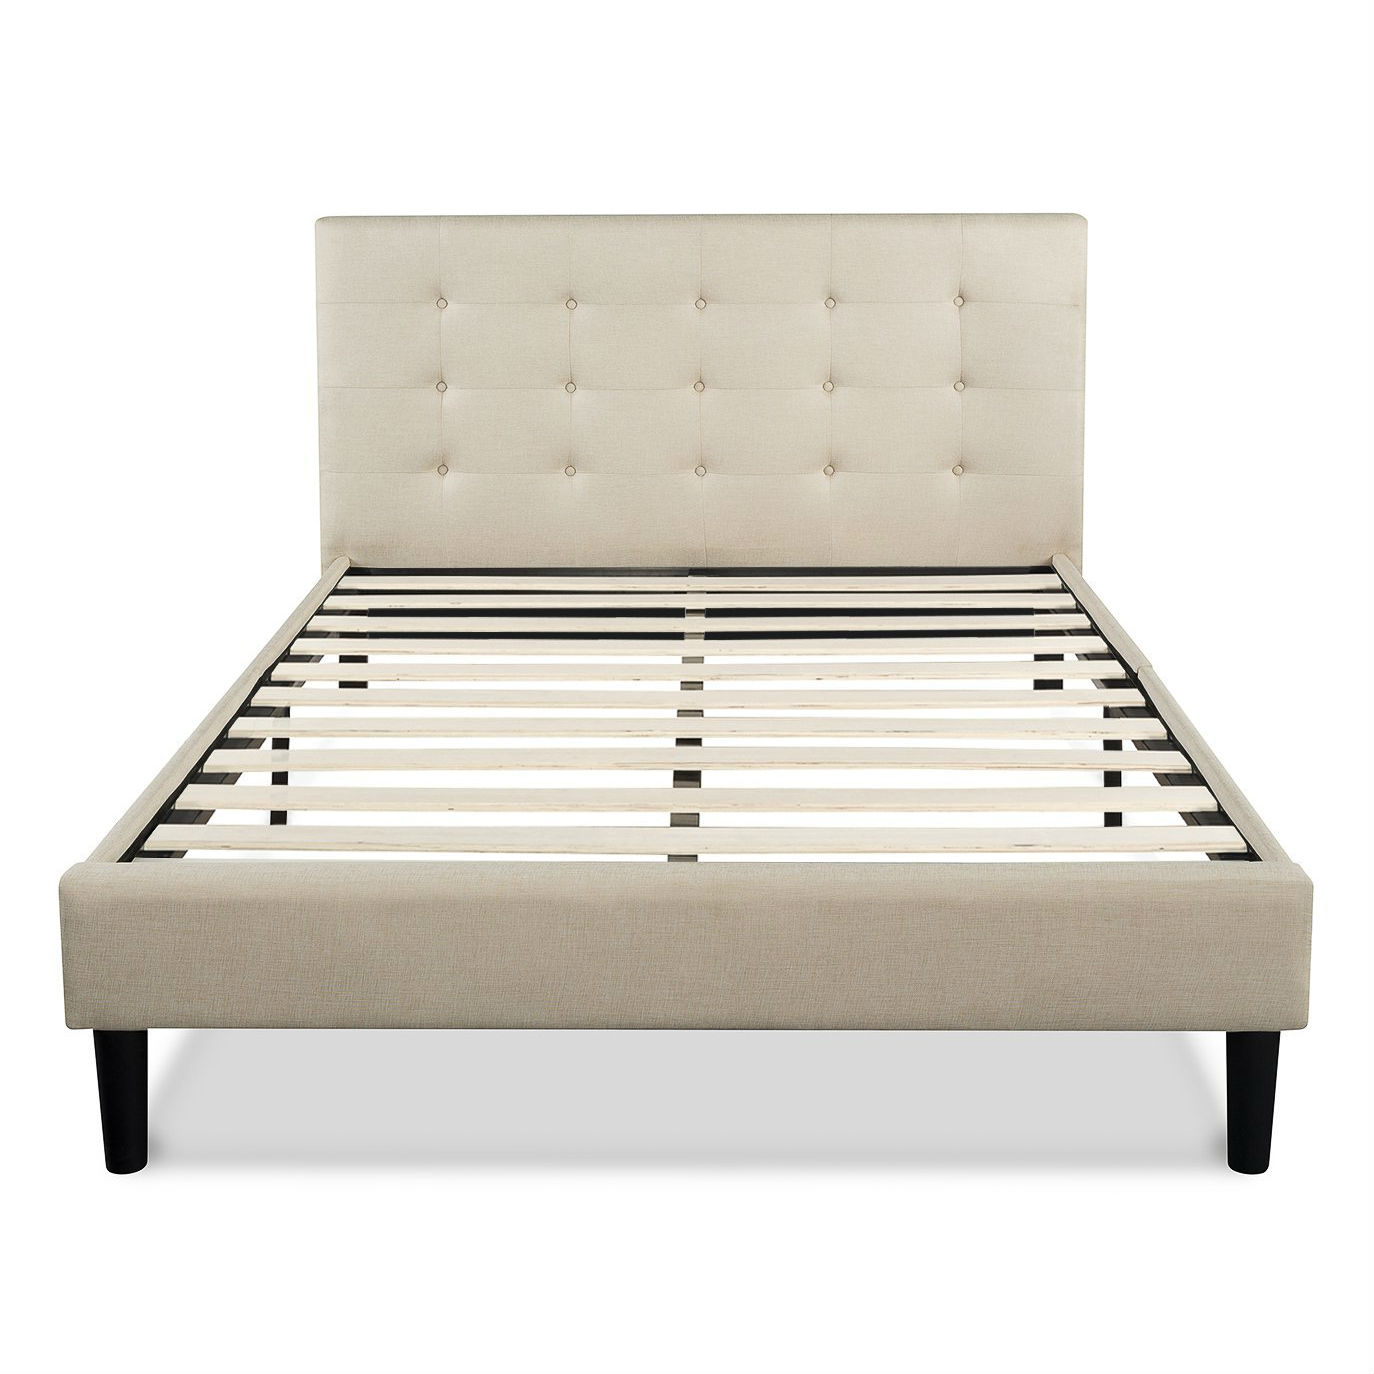 GreenHome123 Light Taupe Beige Upholstered Platform Bed with Button-Tufted Headboad